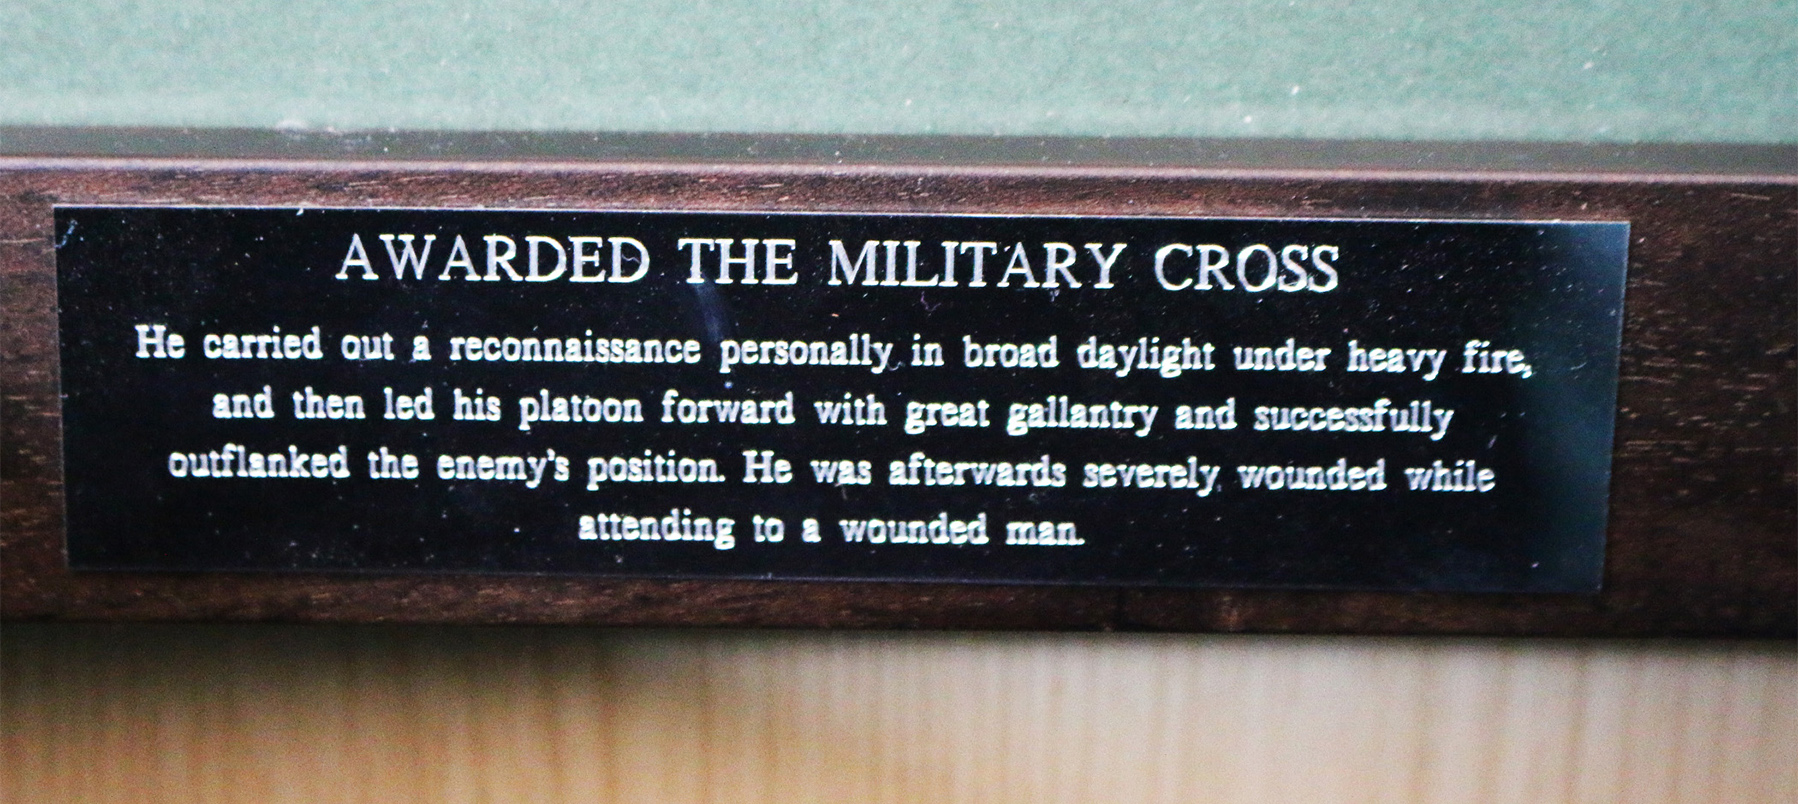 Plaque indicating alumnus awarded the Military Cross